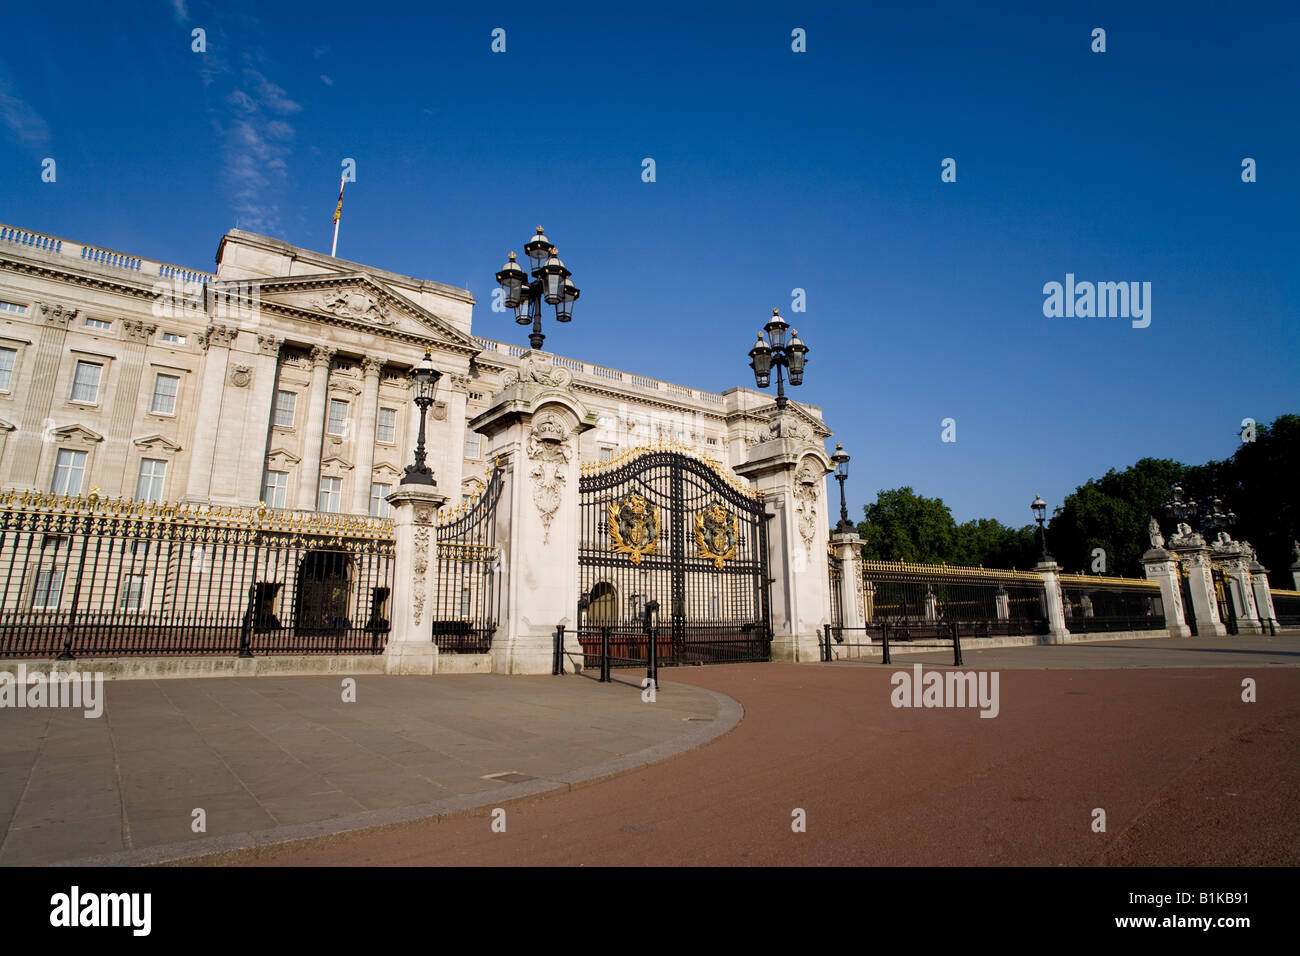 Gate and front of Buckingham Palace on a sunny summer's morning London England UK Royal Standard shows Queen in residence Stock Photo